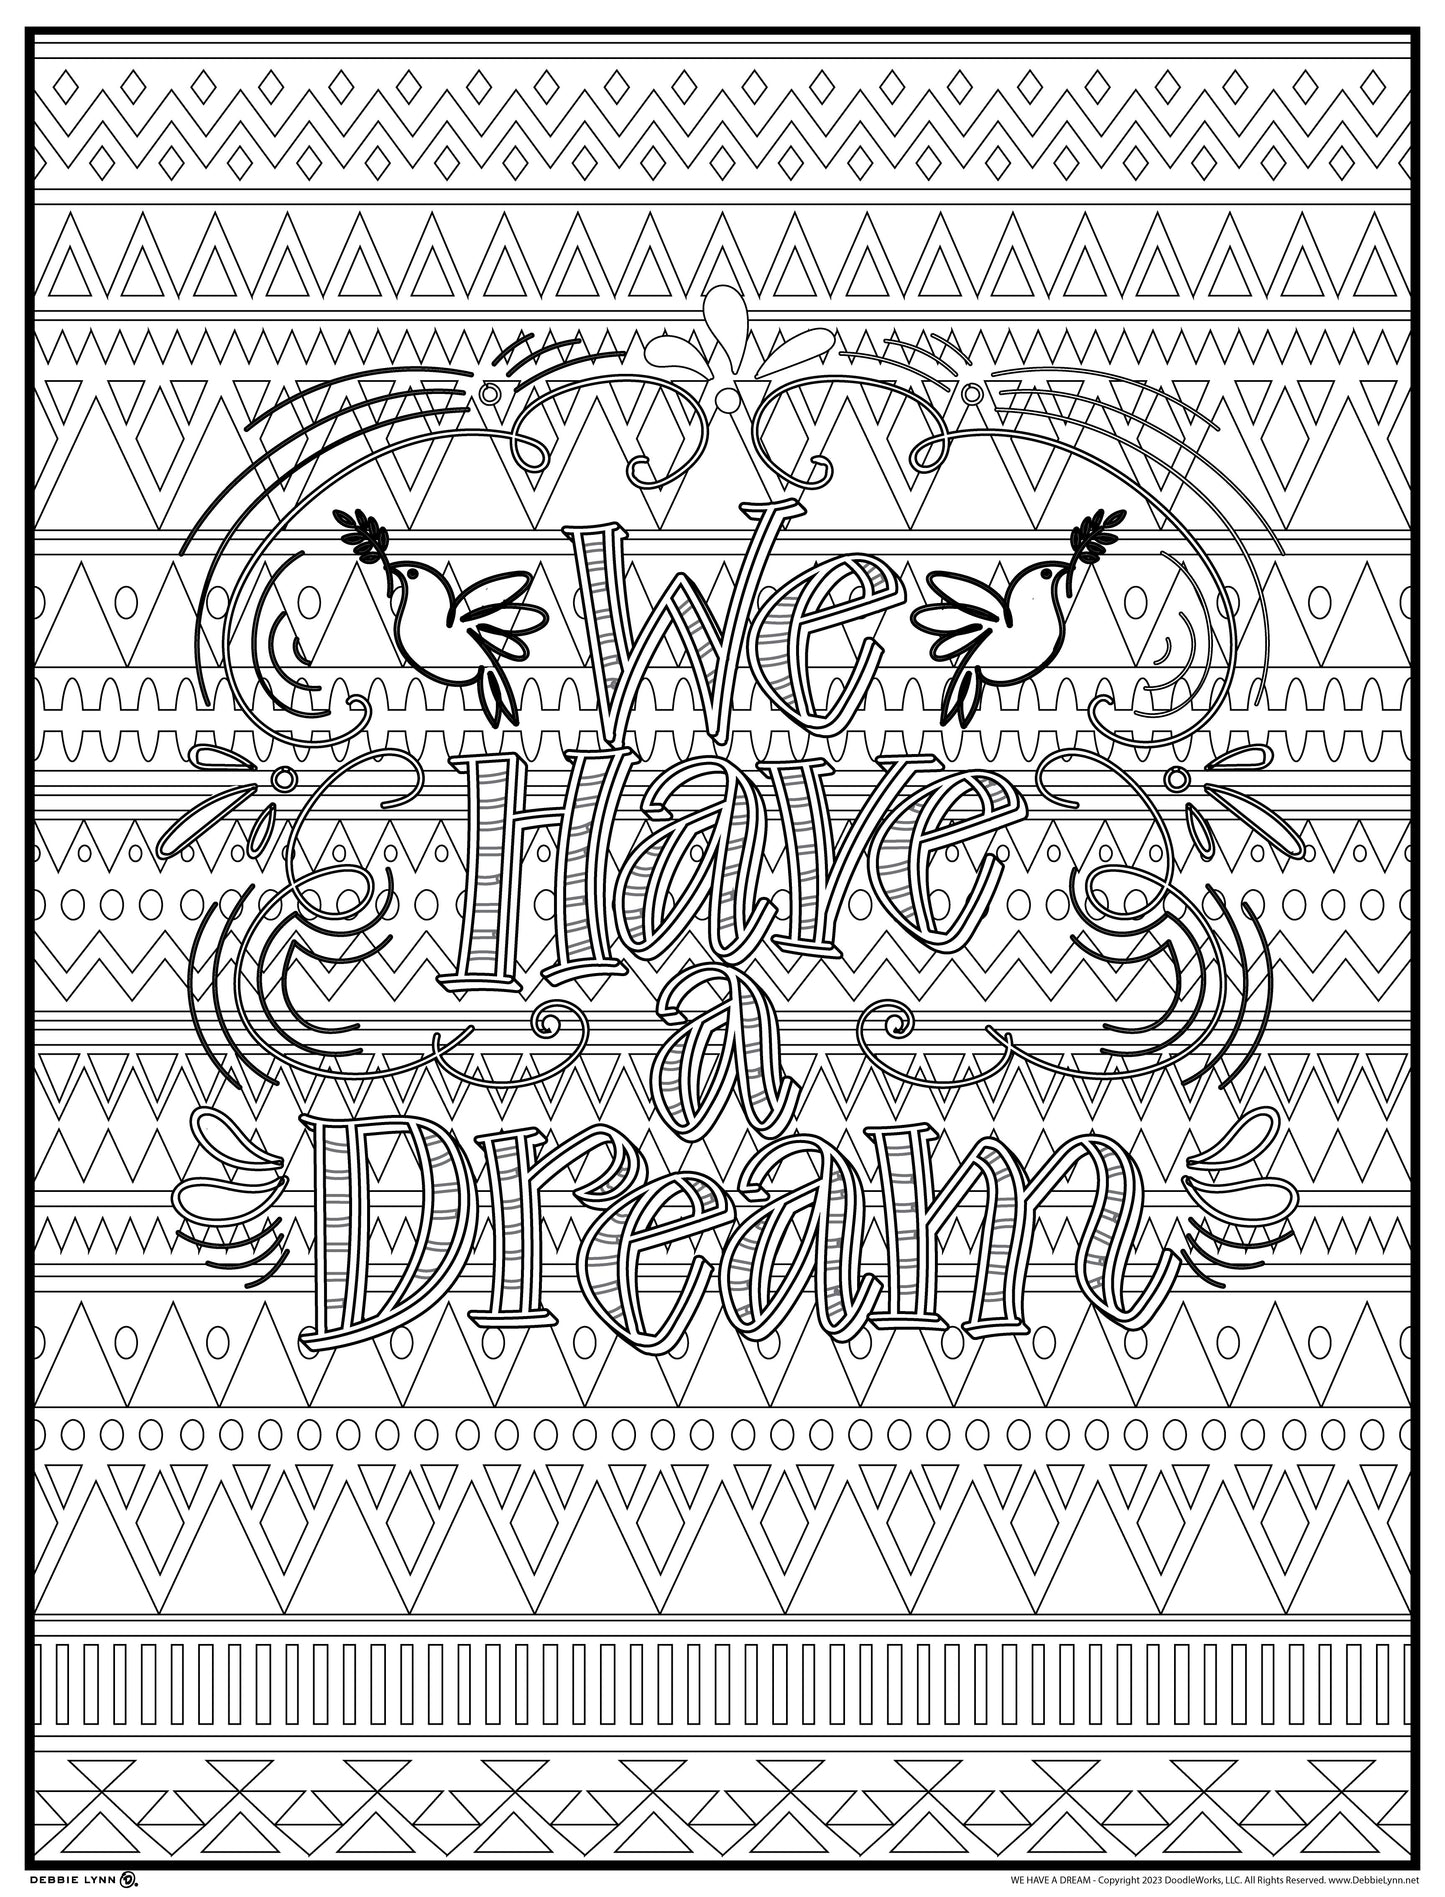 We Have a Dream Personalized Giant Coloring Poster 46"x60"